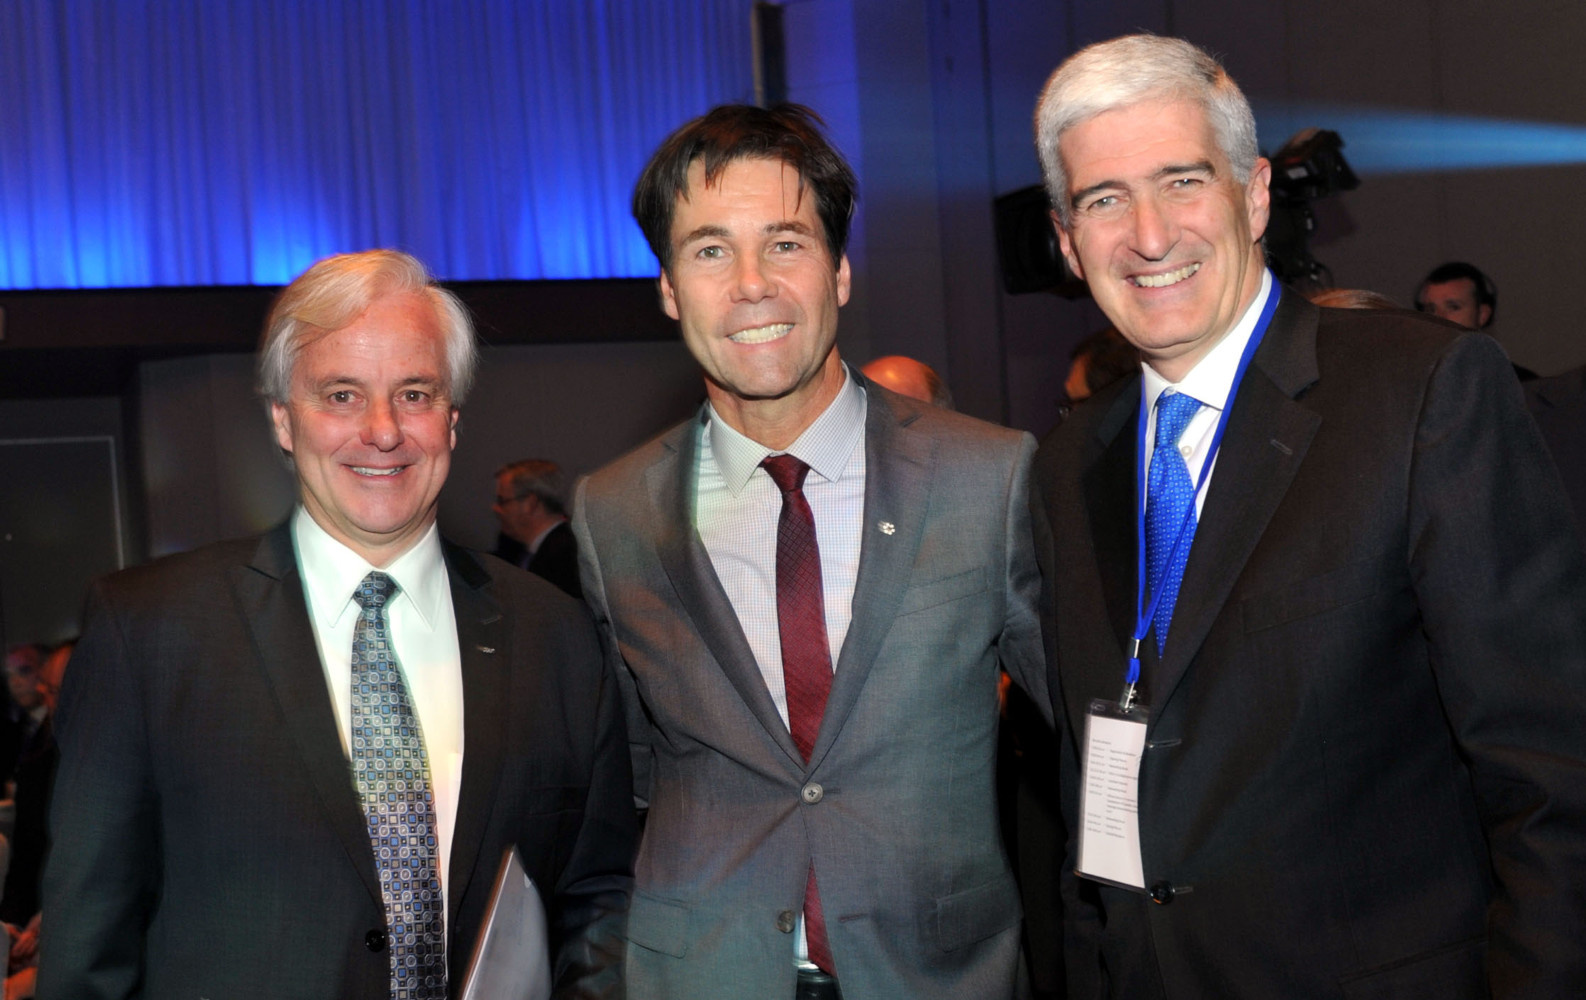 2014 - From left to right: Russell Williams, President of Canada's Research-Based
Pharmaceutical Companies (Rx&D), Dr. Eric Koskins, Ontario's Minister of
Health and Long Term care and Bernard Lachapelle, President of Innovation
Life Canada at Prix Galien Canada and Health Research Fondation Awards Ceremony.